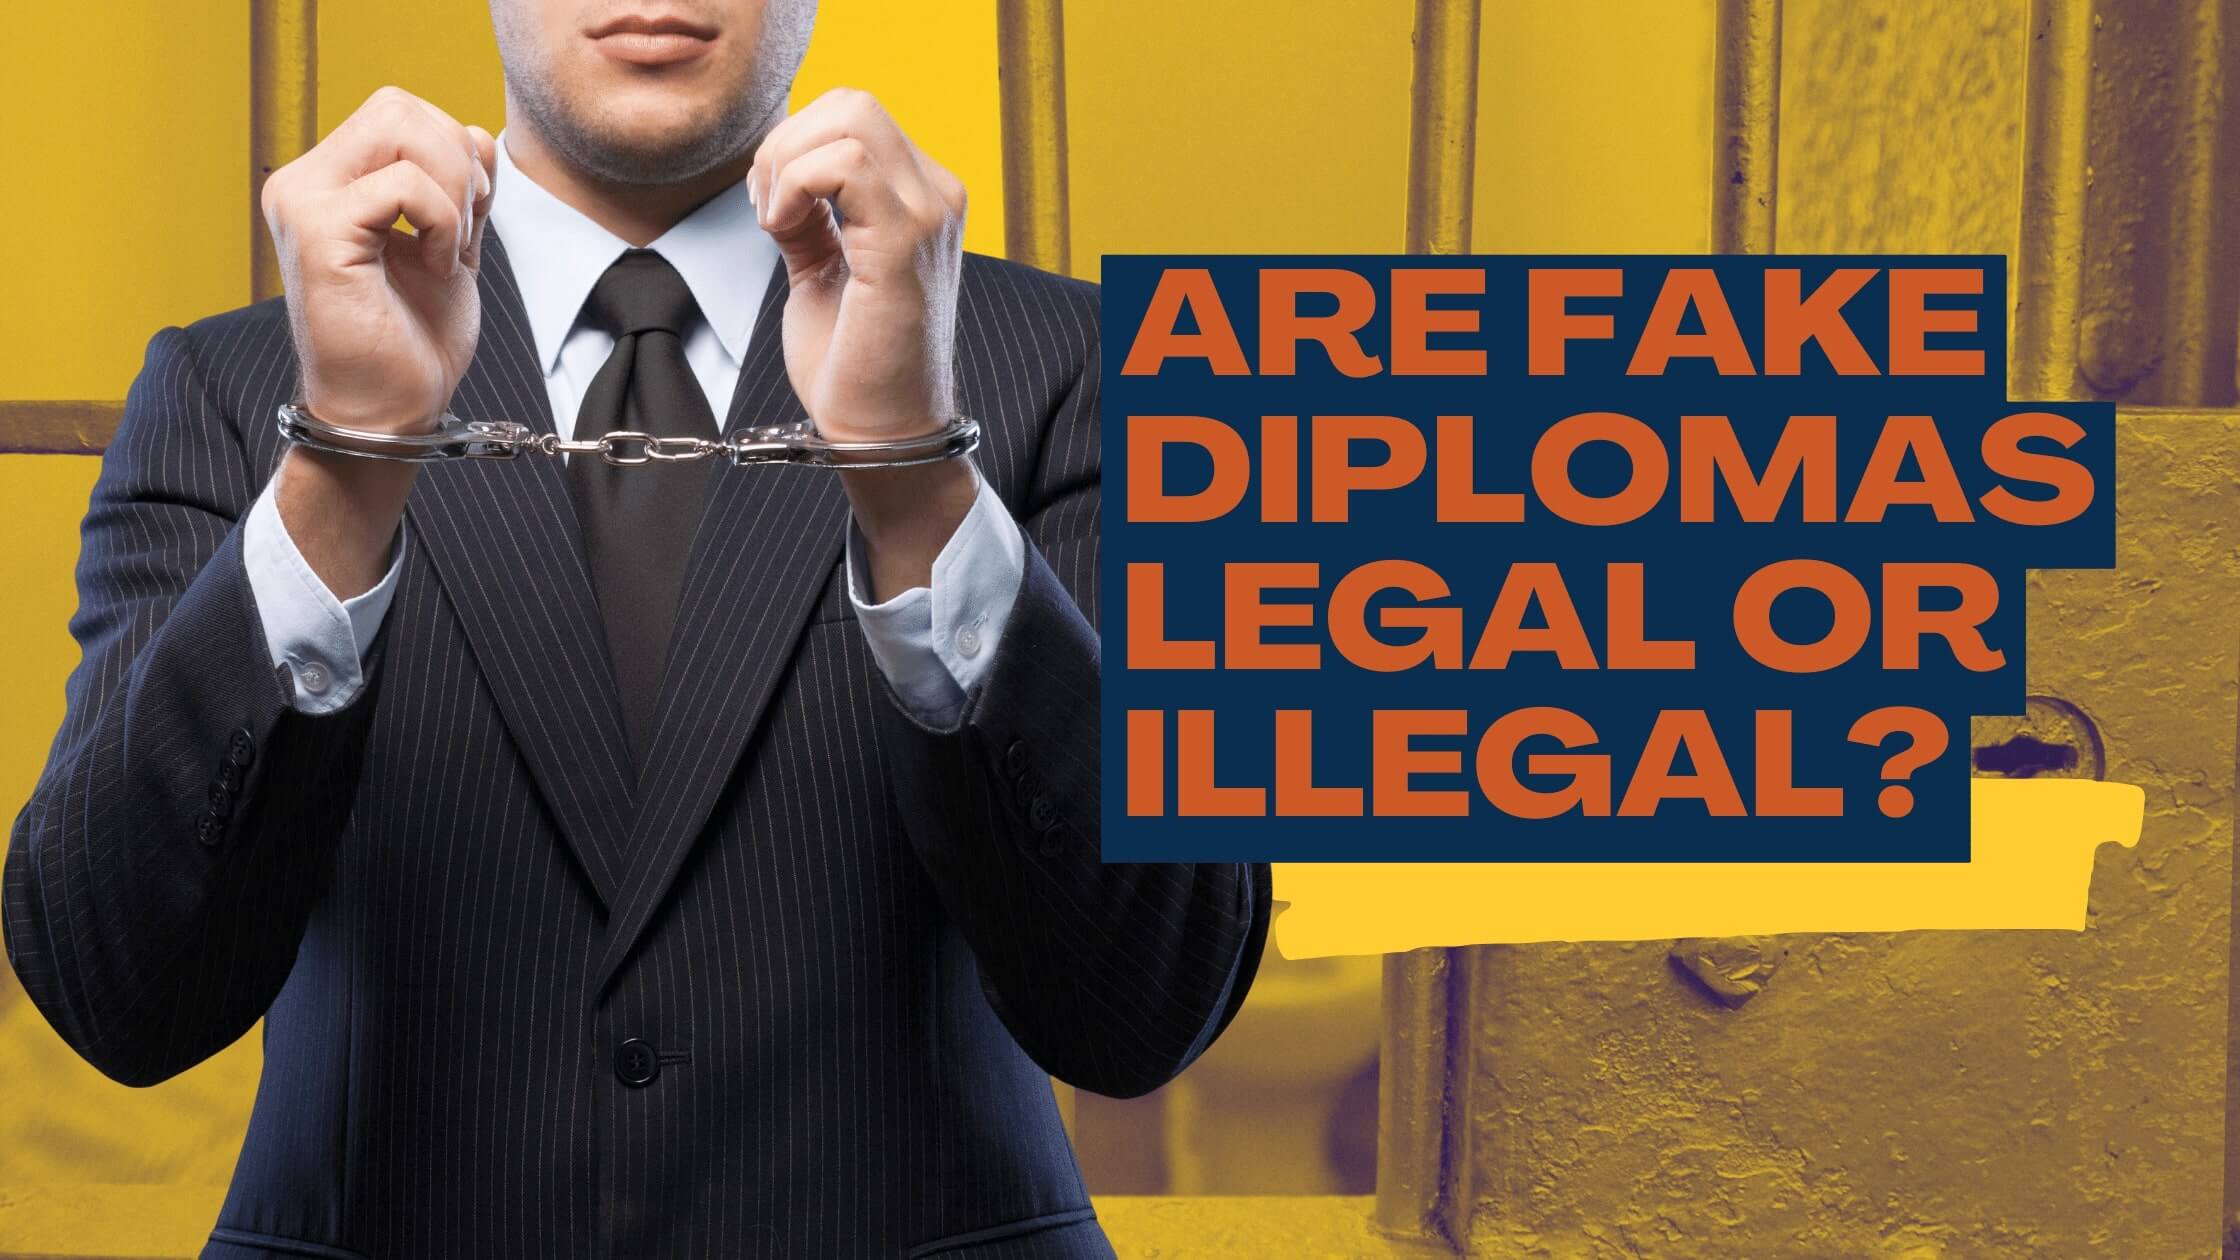 man caught for buying fake diplomas but are they legal or illegal